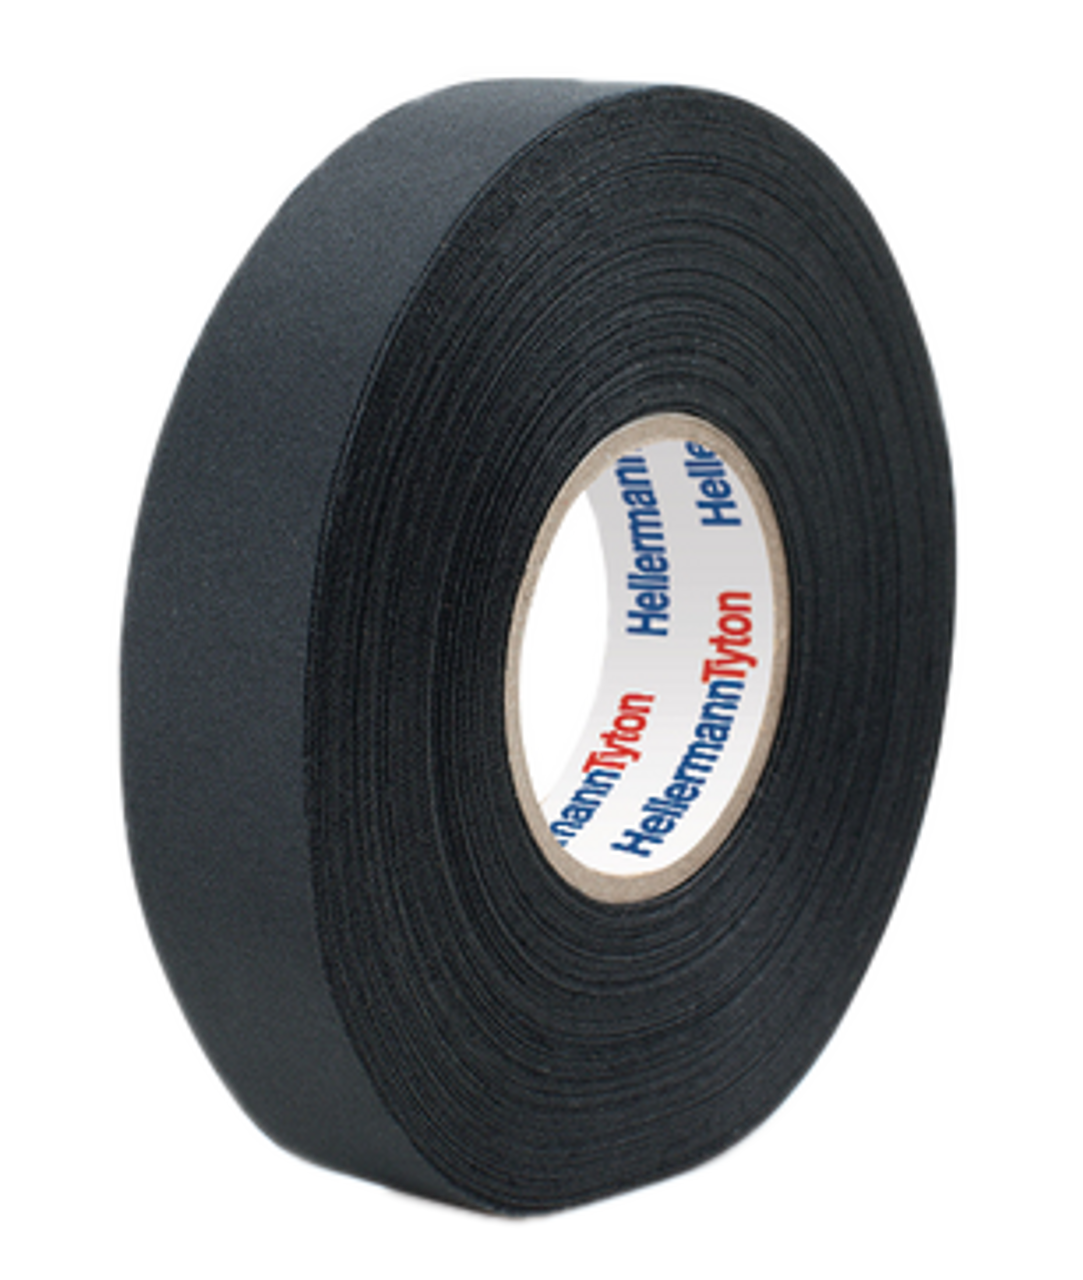 5 Rolls Fabric Tape, Heat Insulation Tape For Wrapping, Car Wiring, Heat  Proof (black)